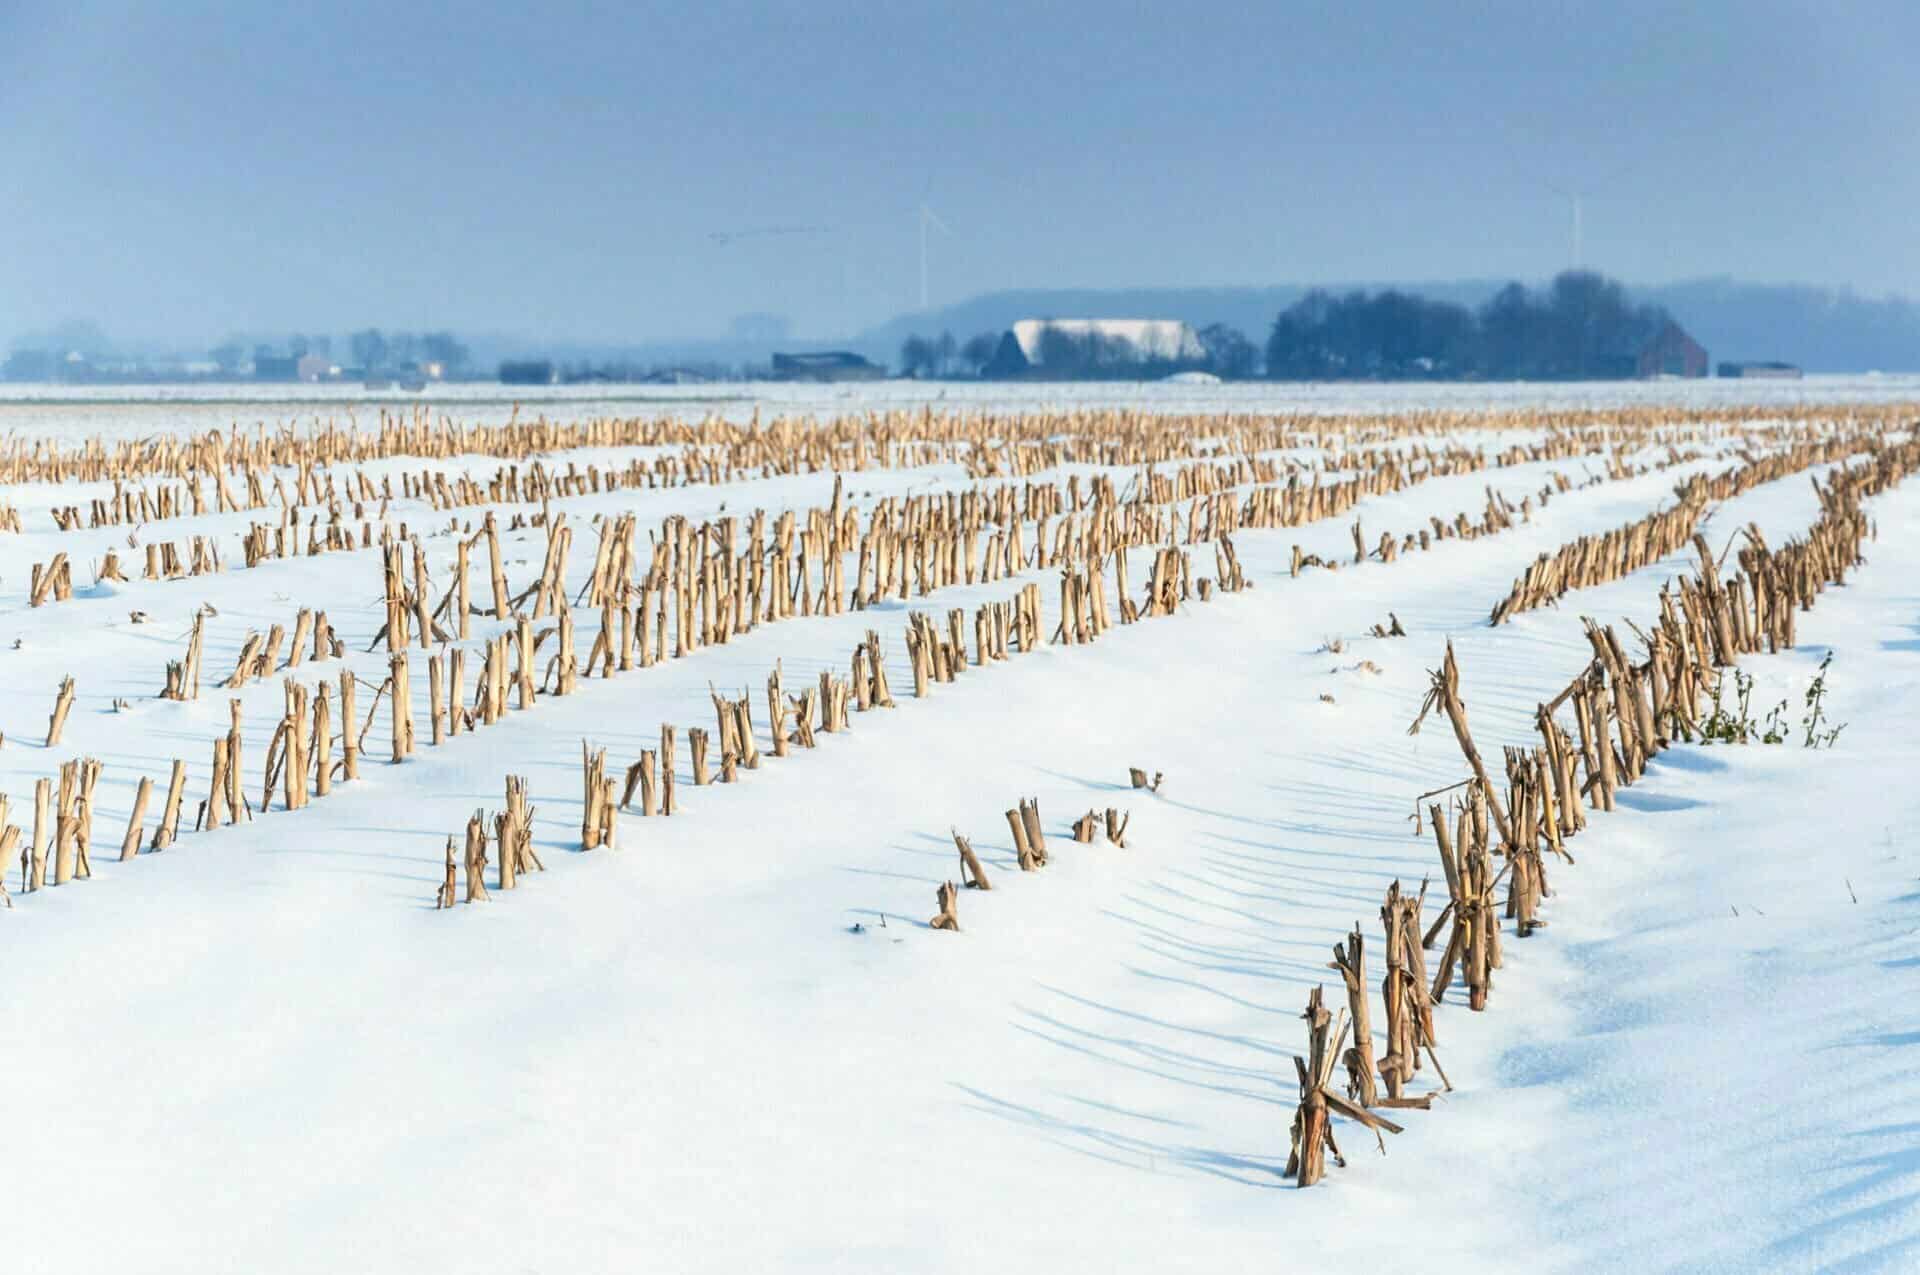 The remainders of cornstalks are shown in a snowy field during the winter.